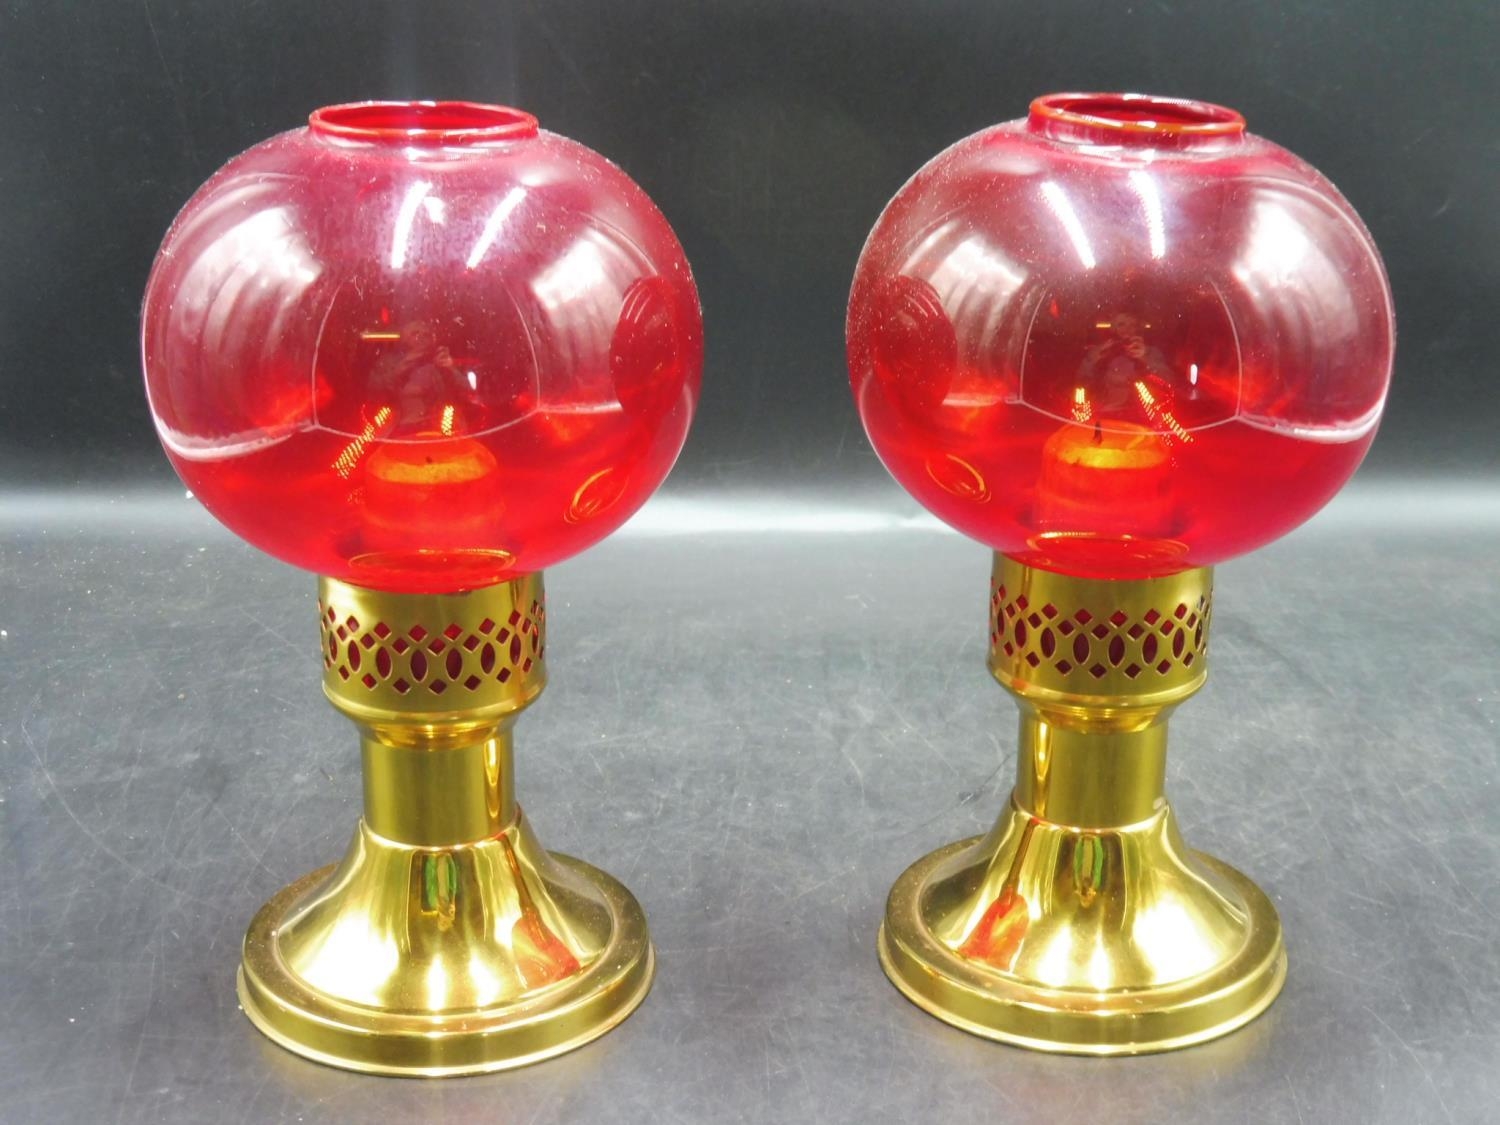 Beheren Succesvol Dronken worden Pair of Vintage Mason Constant Flame Candle Lamp's with Red Glass Shade